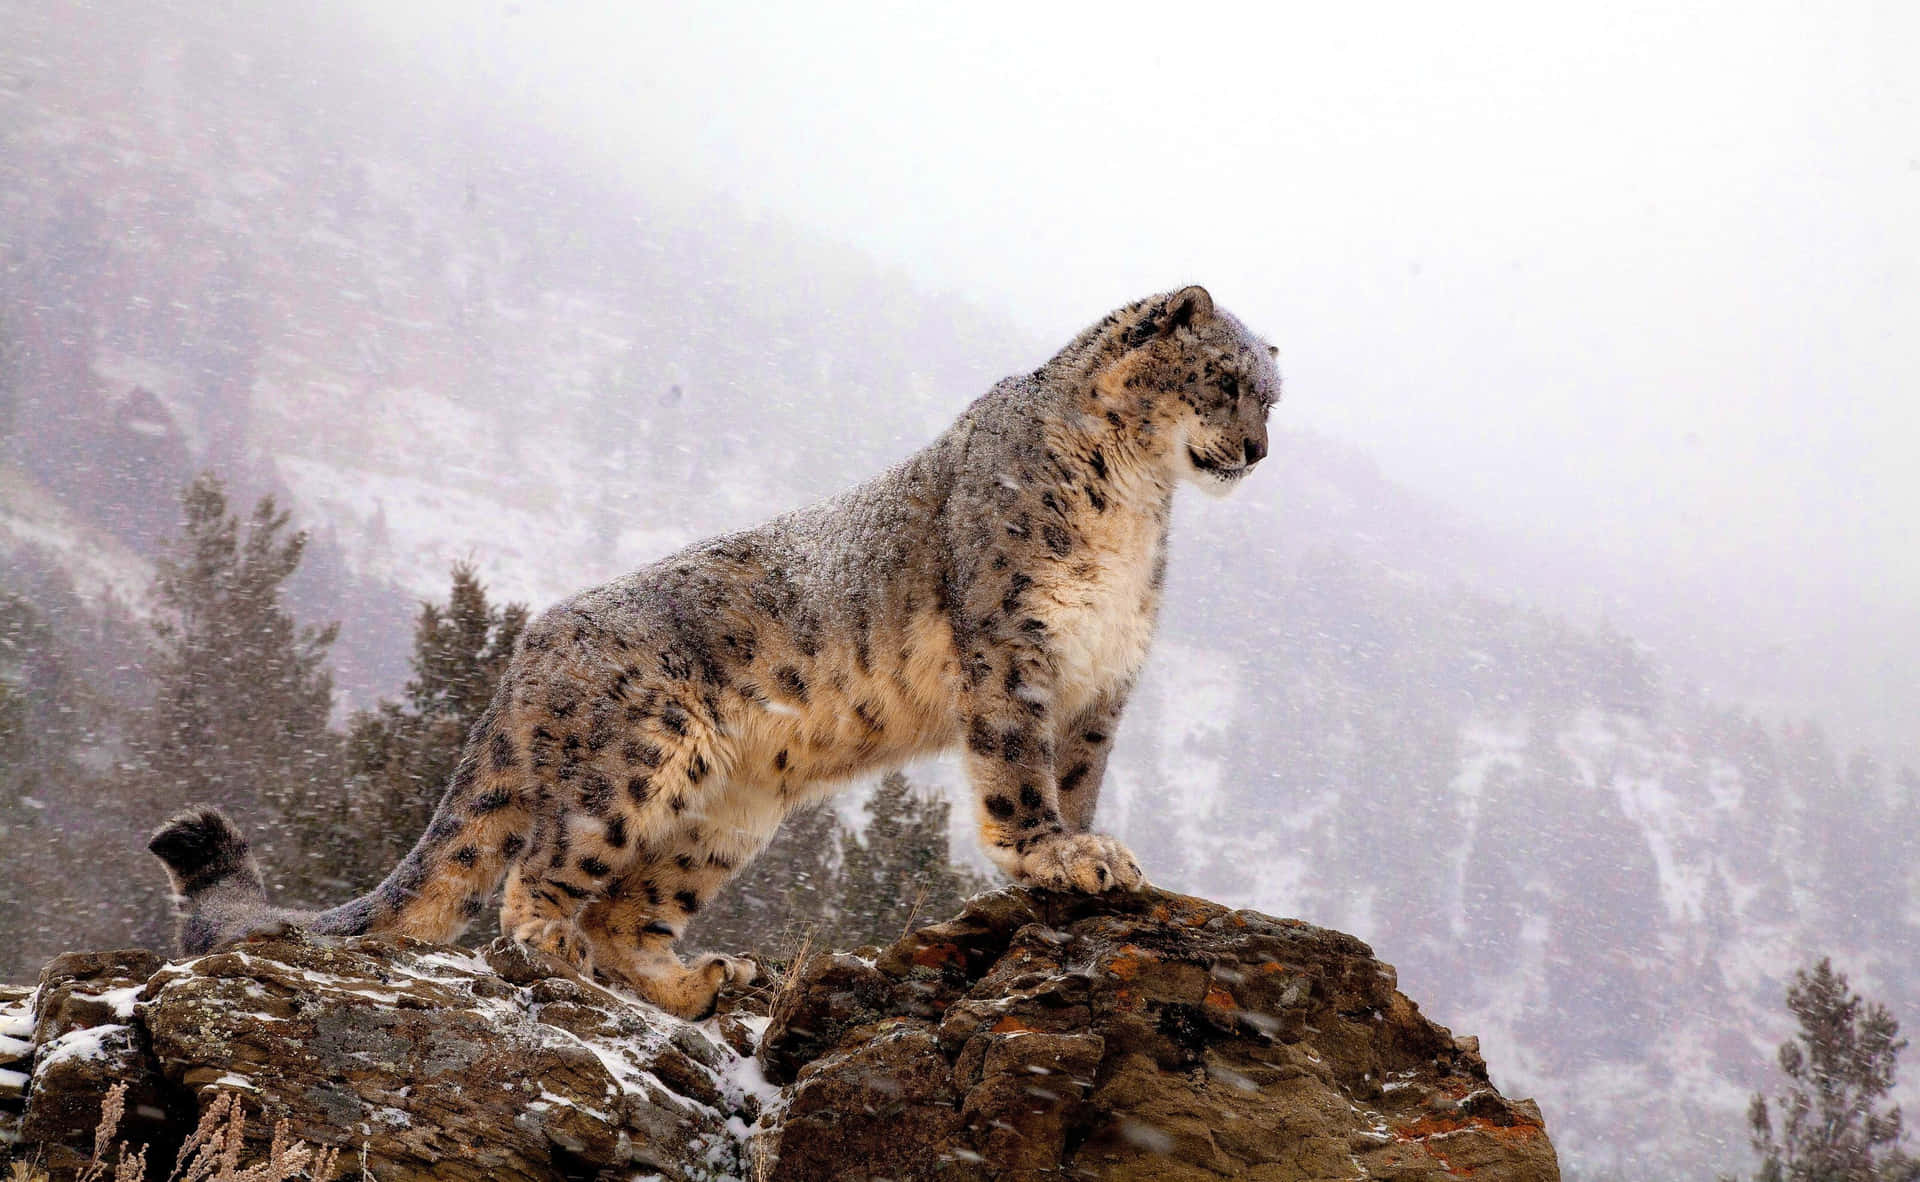 A Snow Leopard stalking its prey in the snow Wallpaper